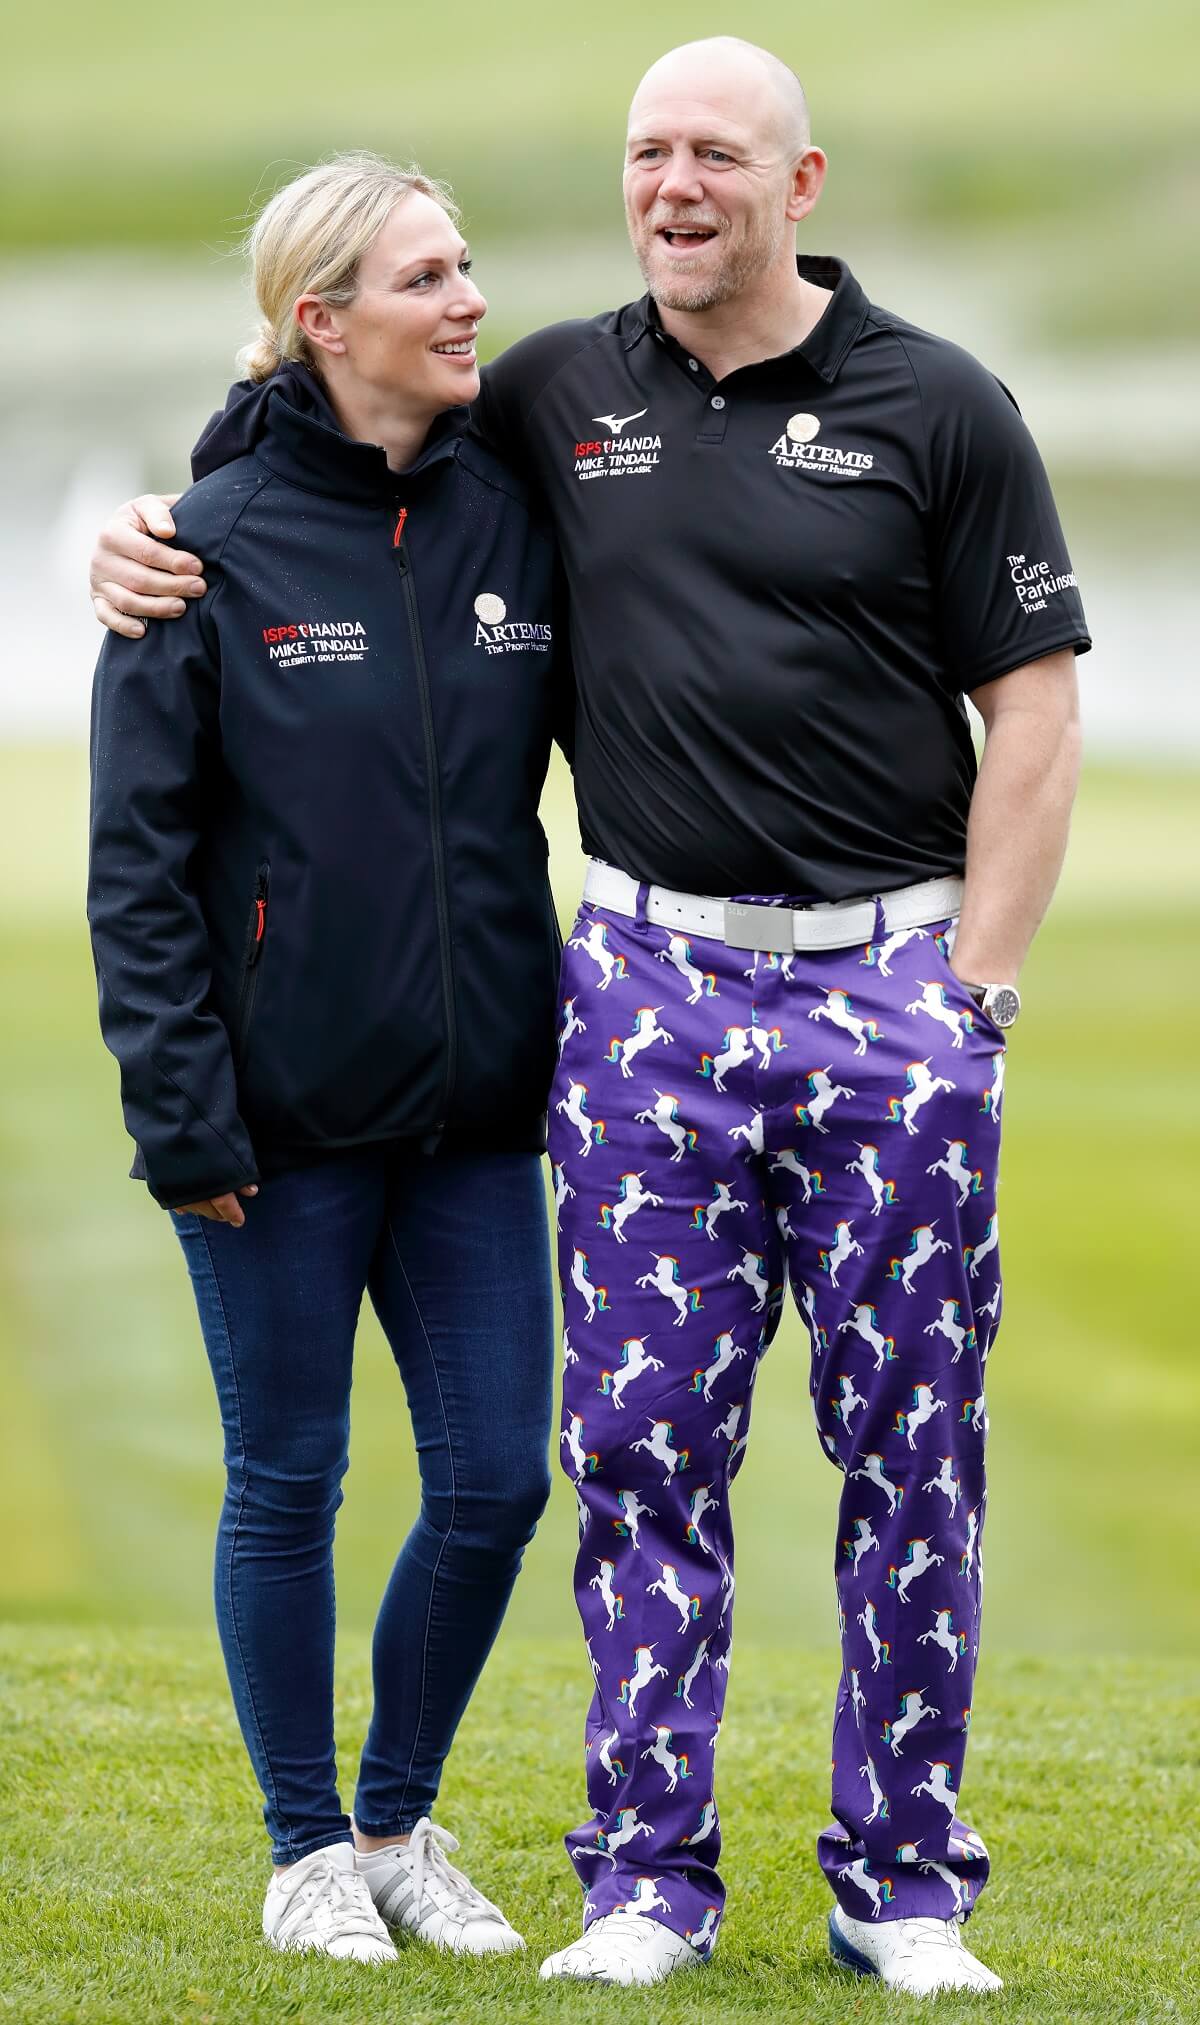 Zara Tindall and Mike Tindall attend the ISPS Handa Mike Tindall Celebrity Golf Classic 